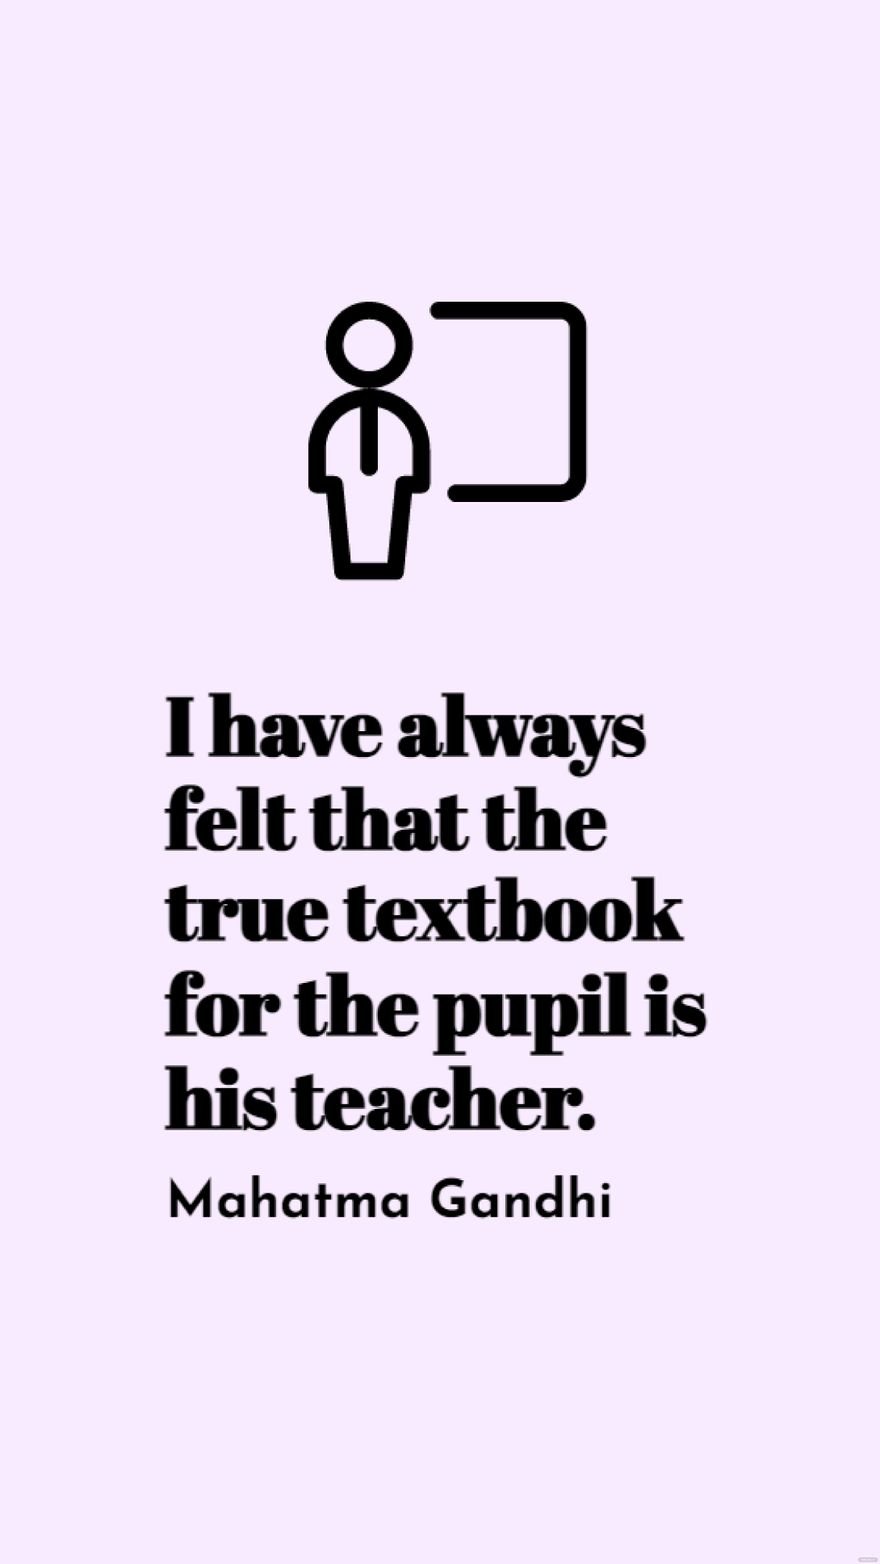 Free Mahatma Gandhi - I have always felt that the true textbook for the pupil is his teacher. in JPG